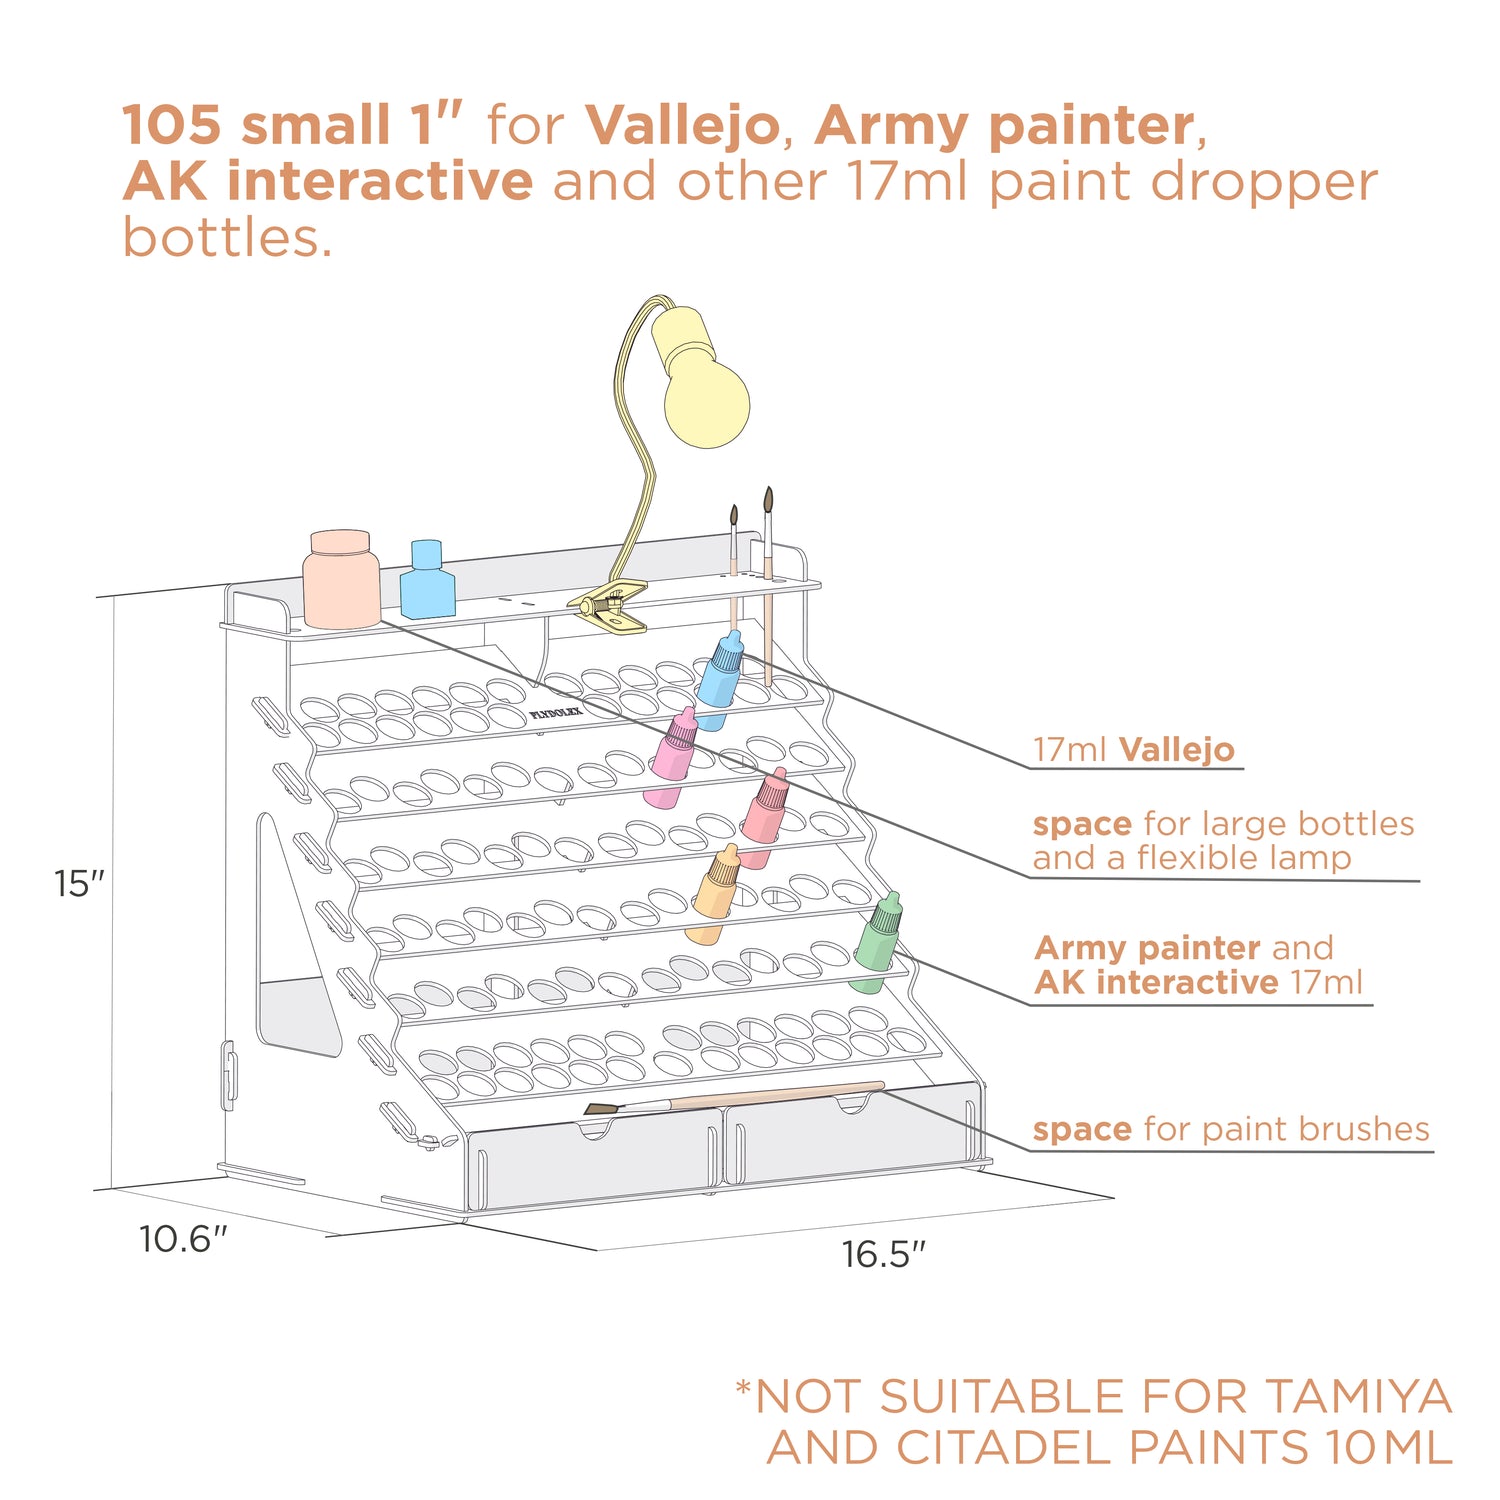 Vallejo paint bottle storage Tray by Tantalus